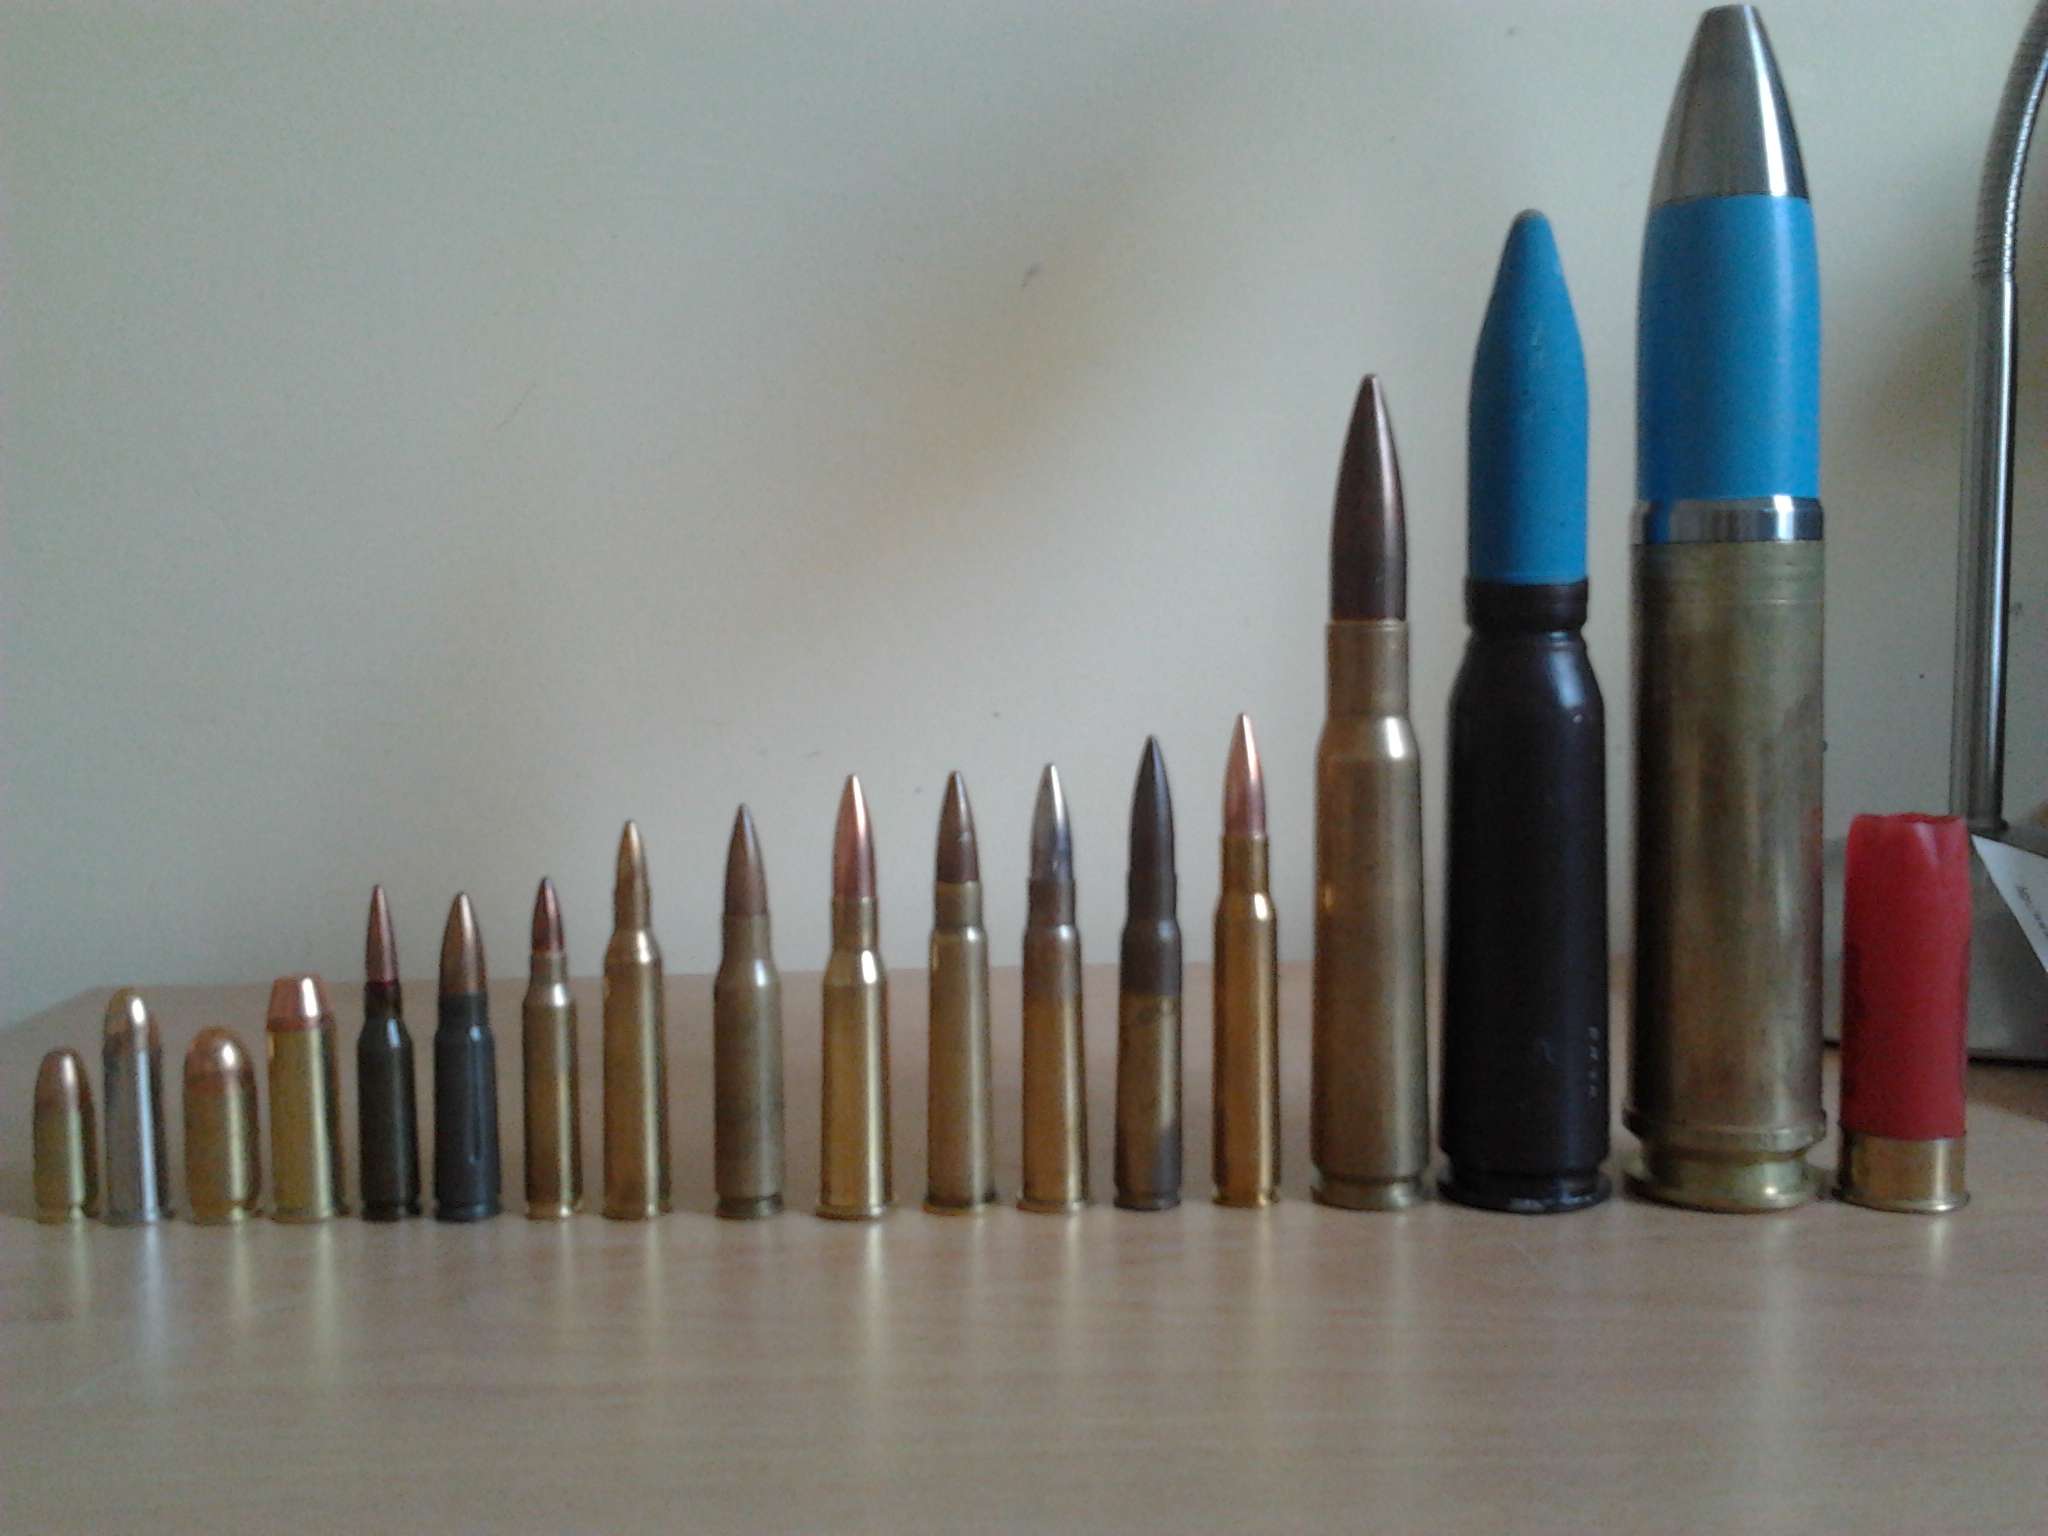 From left to right: - 9mm parabellum - .38 special - .45 ACP - .44 Magnum -...